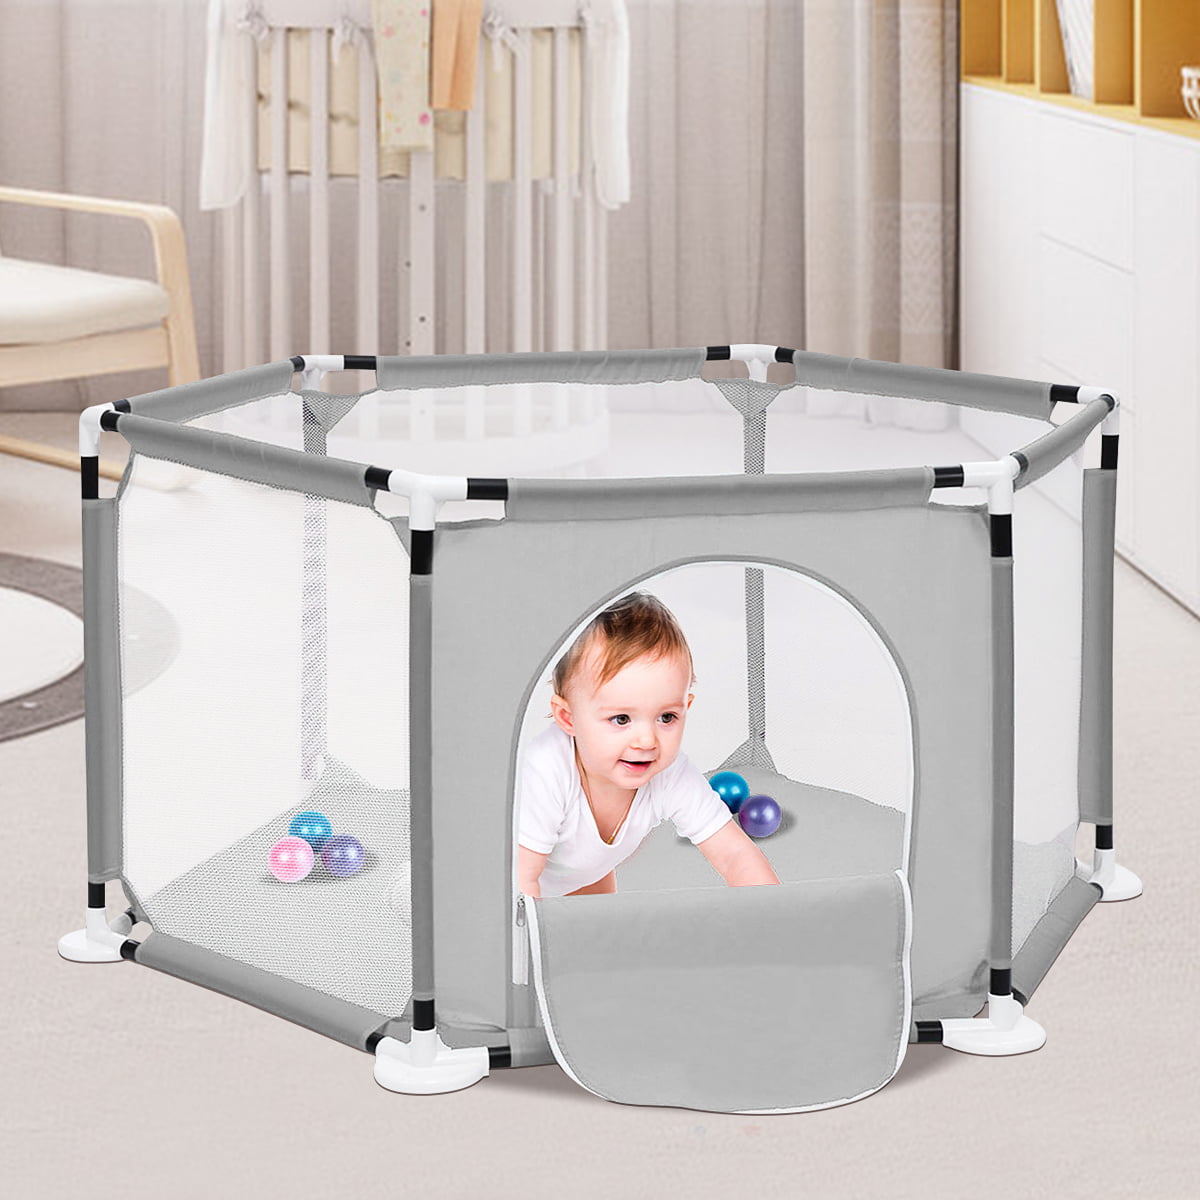 Playpen for Baby Indoors Outdoors Child Playpen Fence Safety Games Crawling Playpen for Babies Toddler 6-Panel Foldable Portable Baby Playpen Grey 